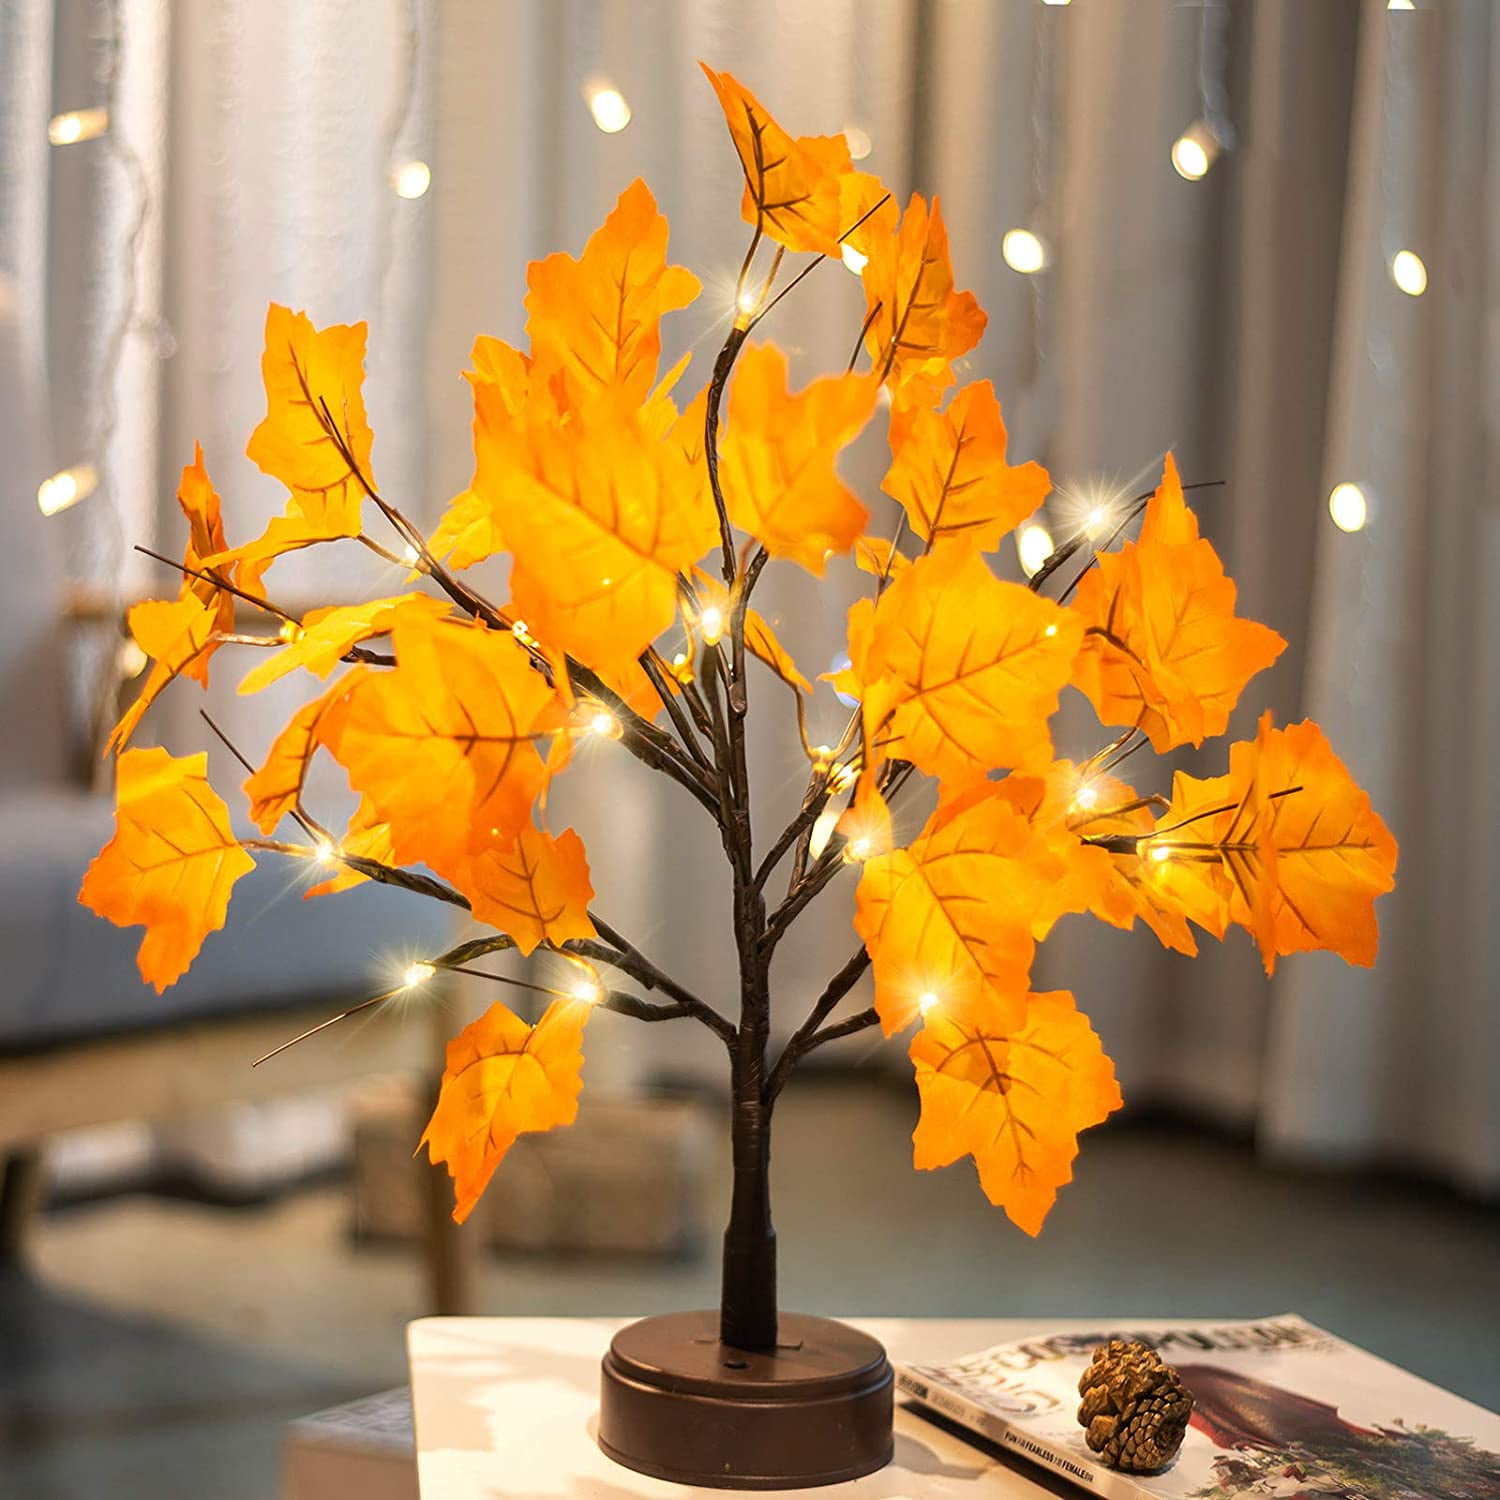 24 LED Lighted Tabletop Fall Maple Tree With Warm White LED Lights Xmas Decor AA 